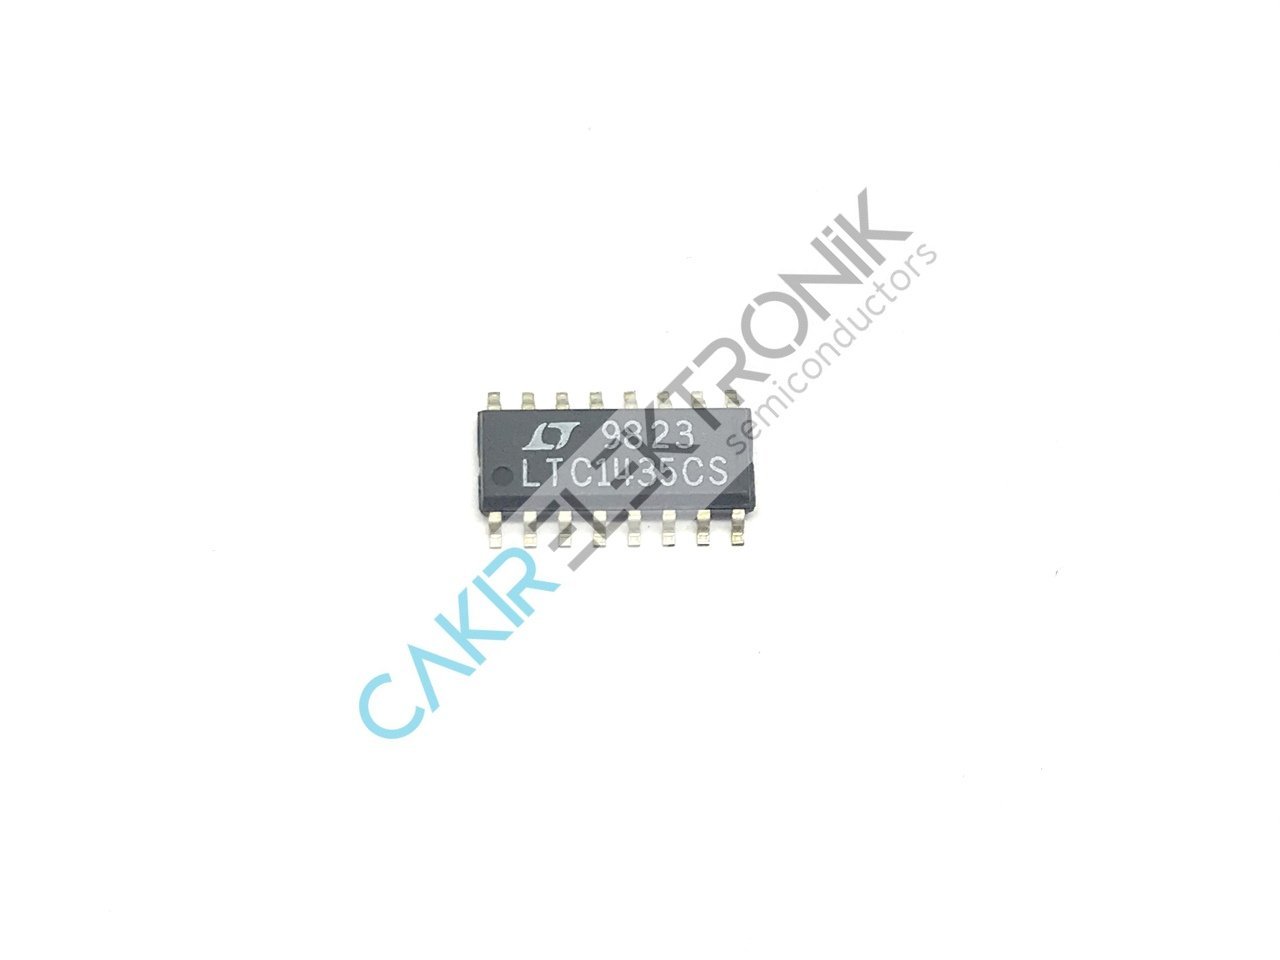 LTC1435 - LTC1435CS  -  SOIC16 - High Efficiency Low Noise Synchronous Step-Down Switching Regulator